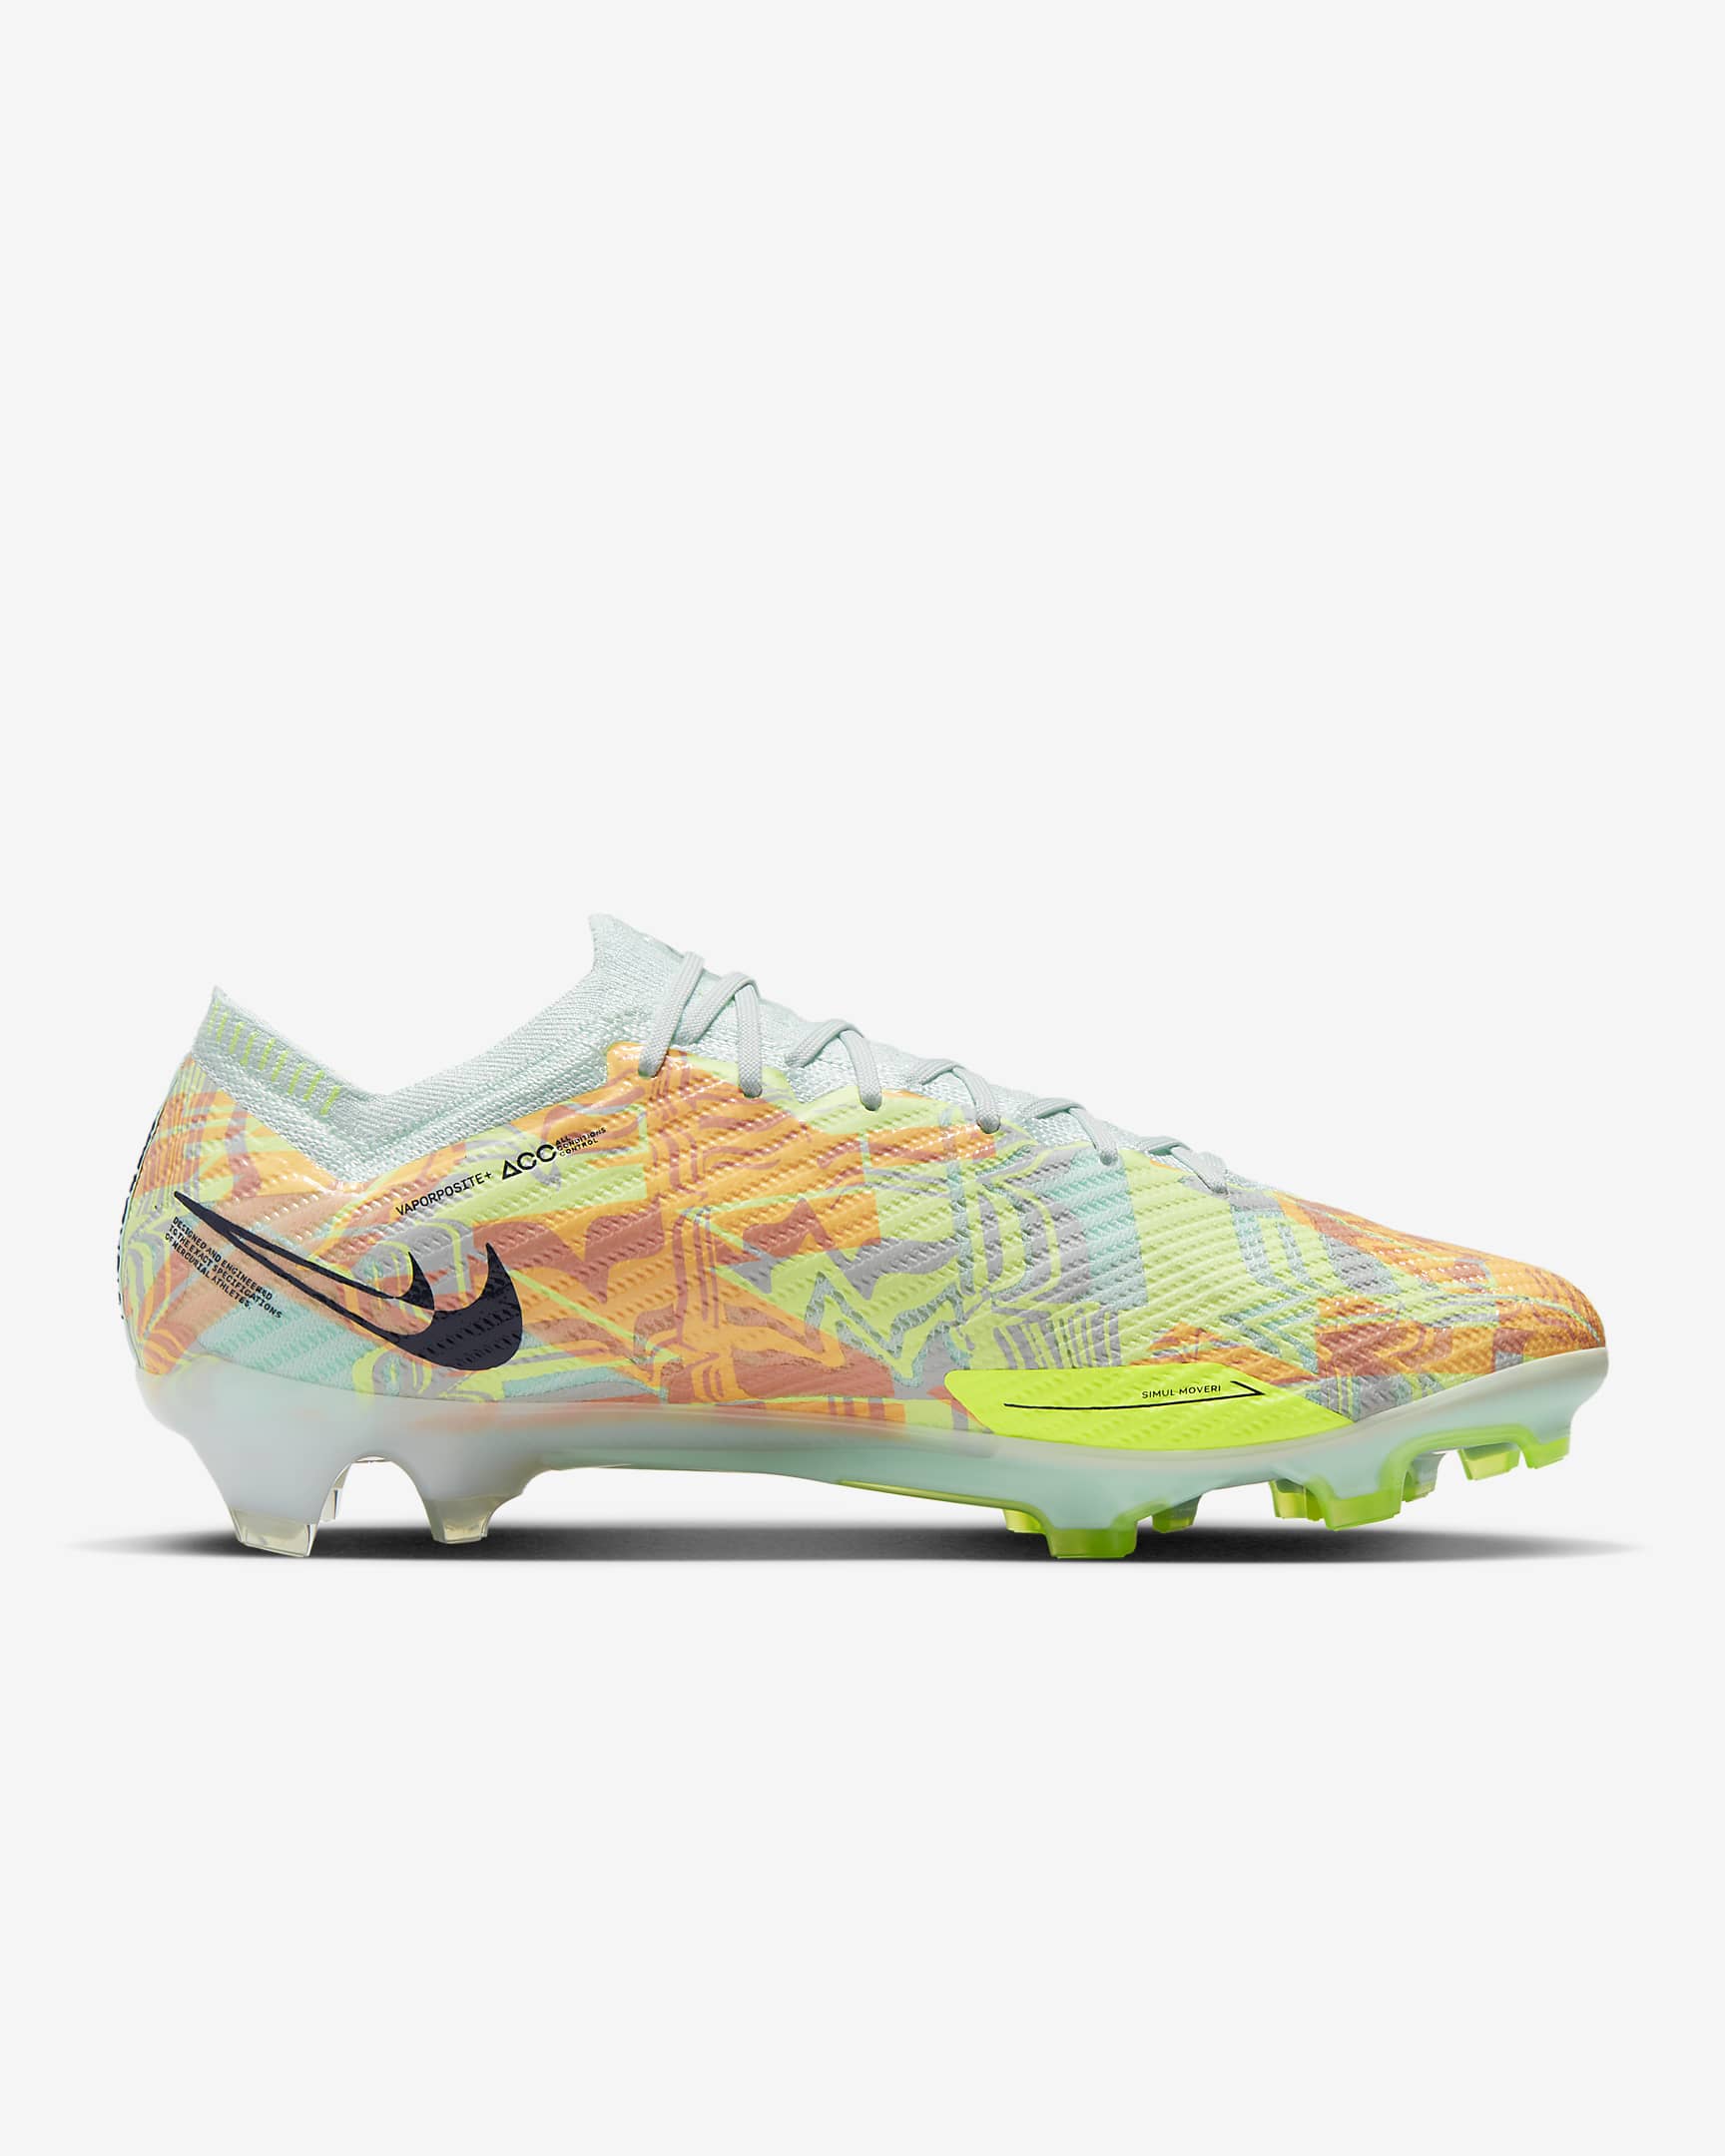 Nike Mercurial Vapor 15 Elite By You Custom Firm-Ground Soccer Cleats